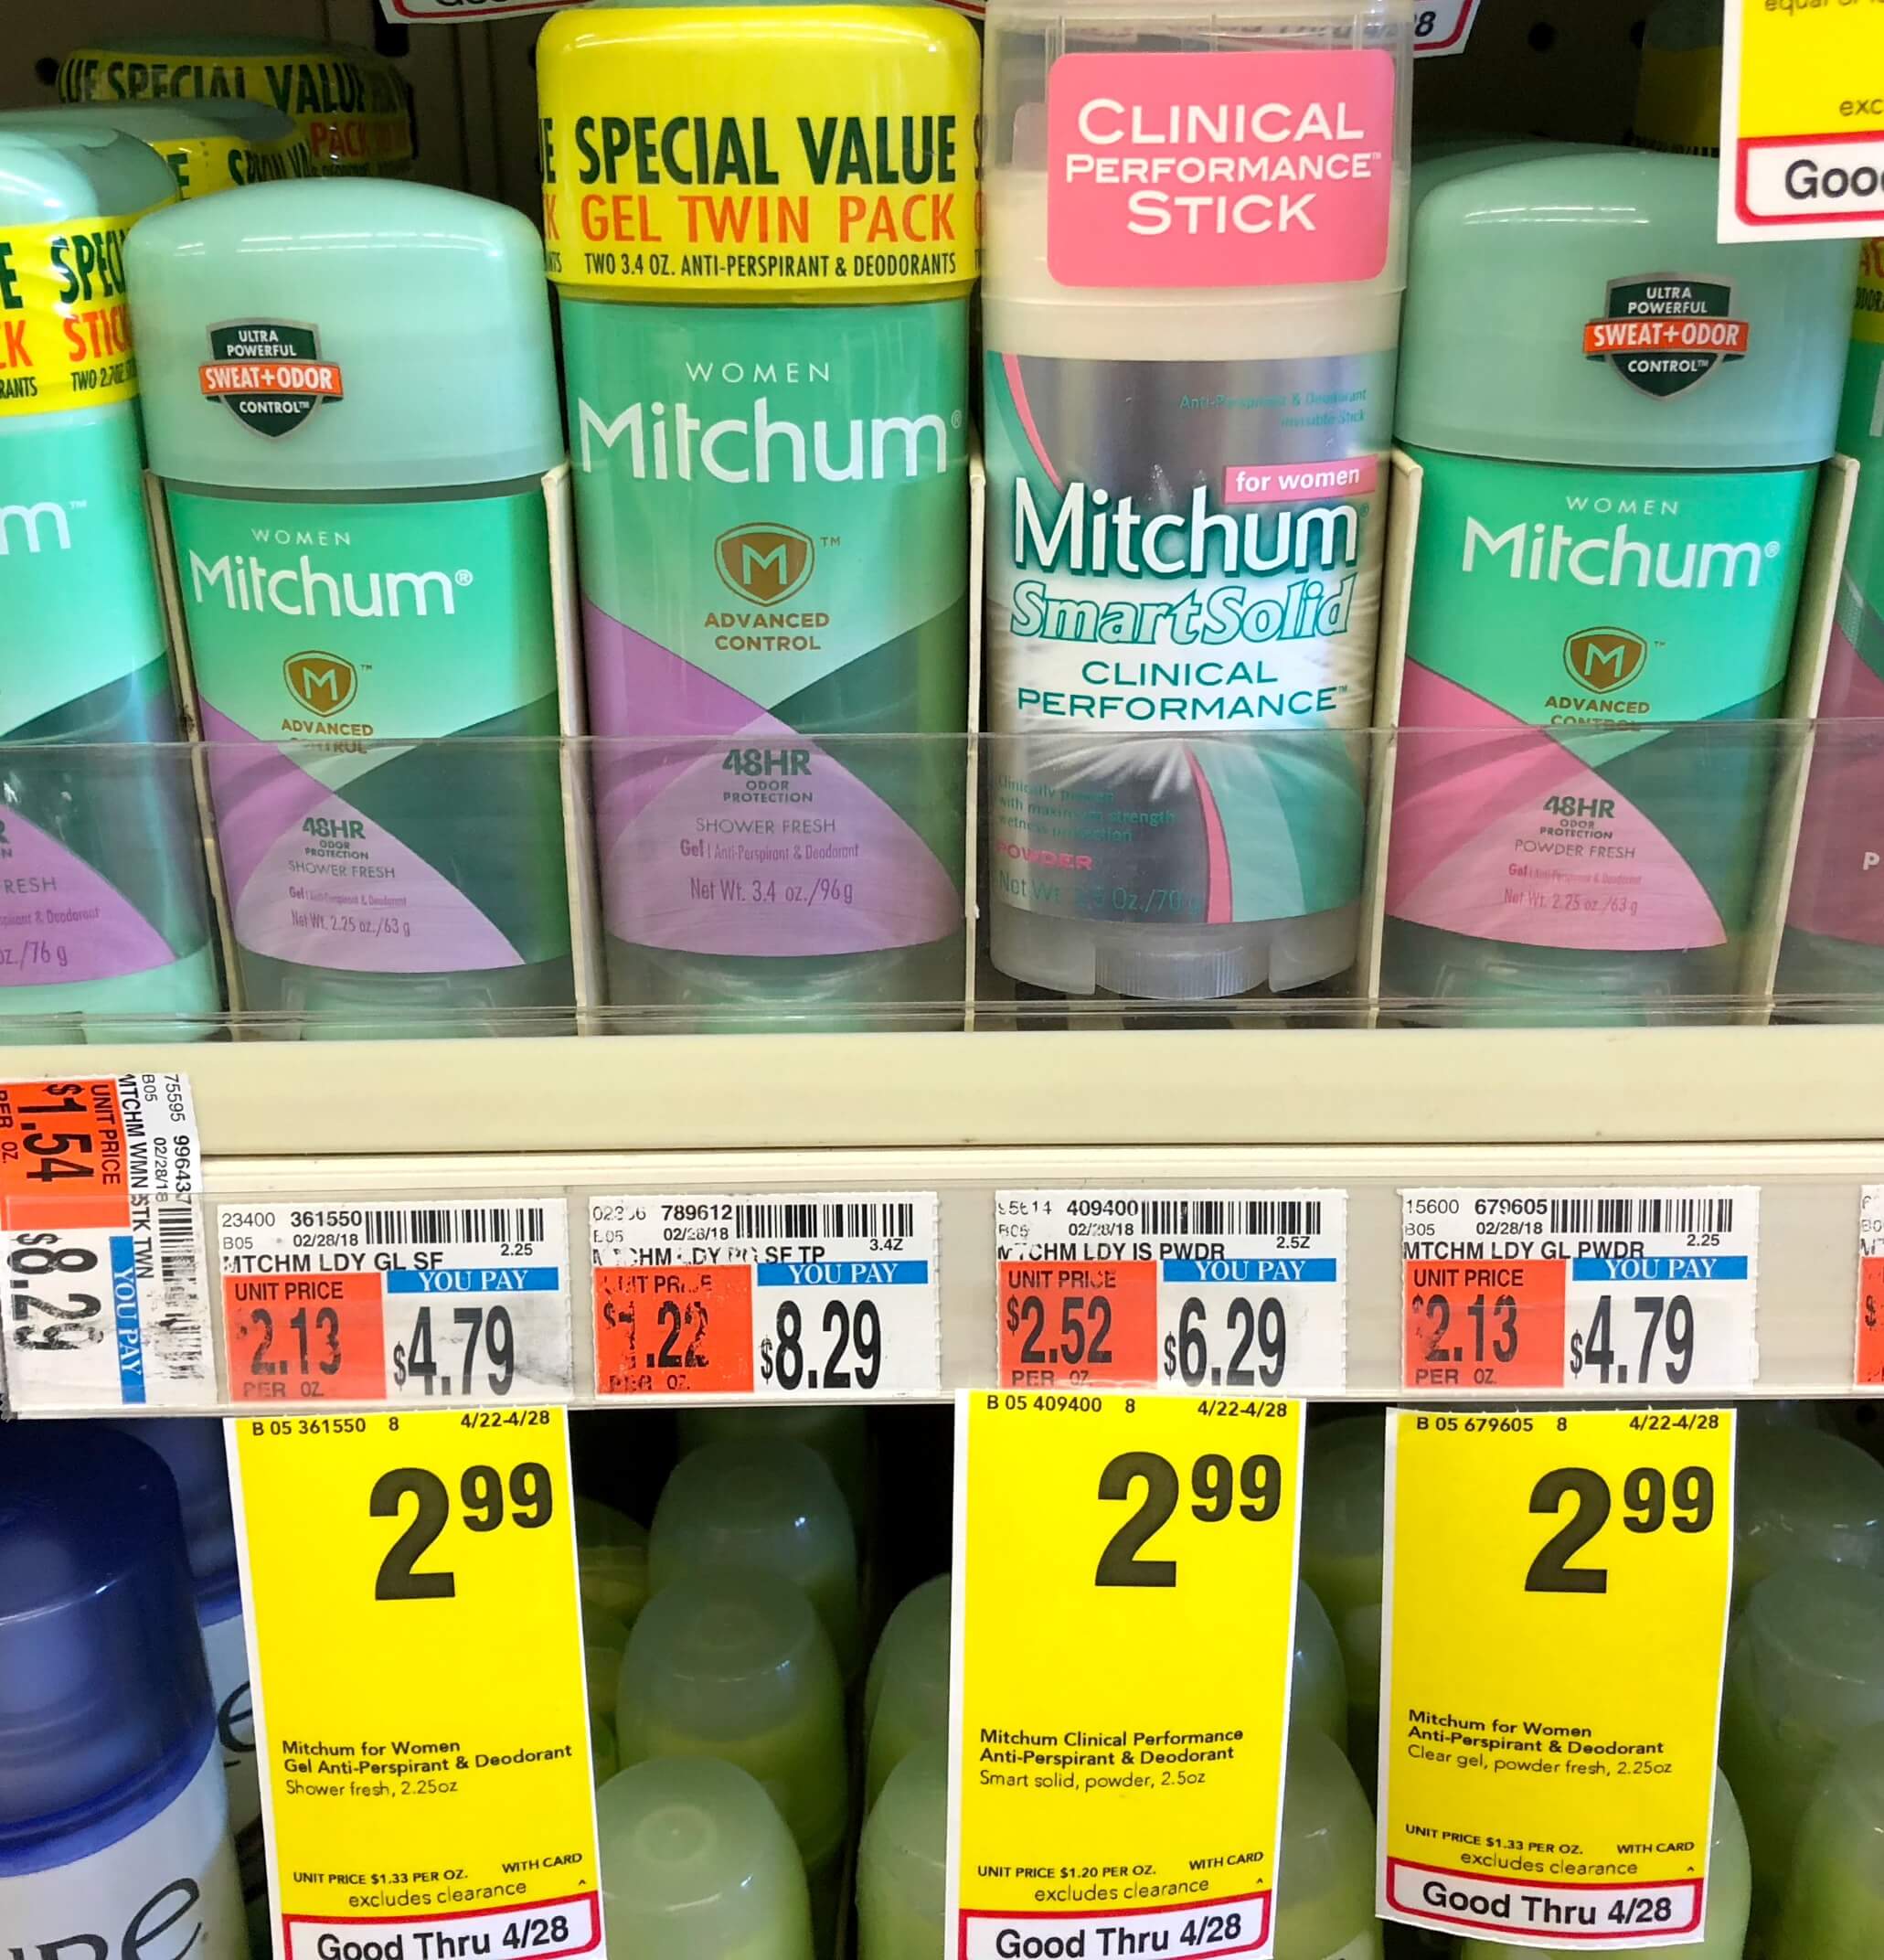 Mitchum Deodorant as Low as FREE at CVS Living Rich With Coupons